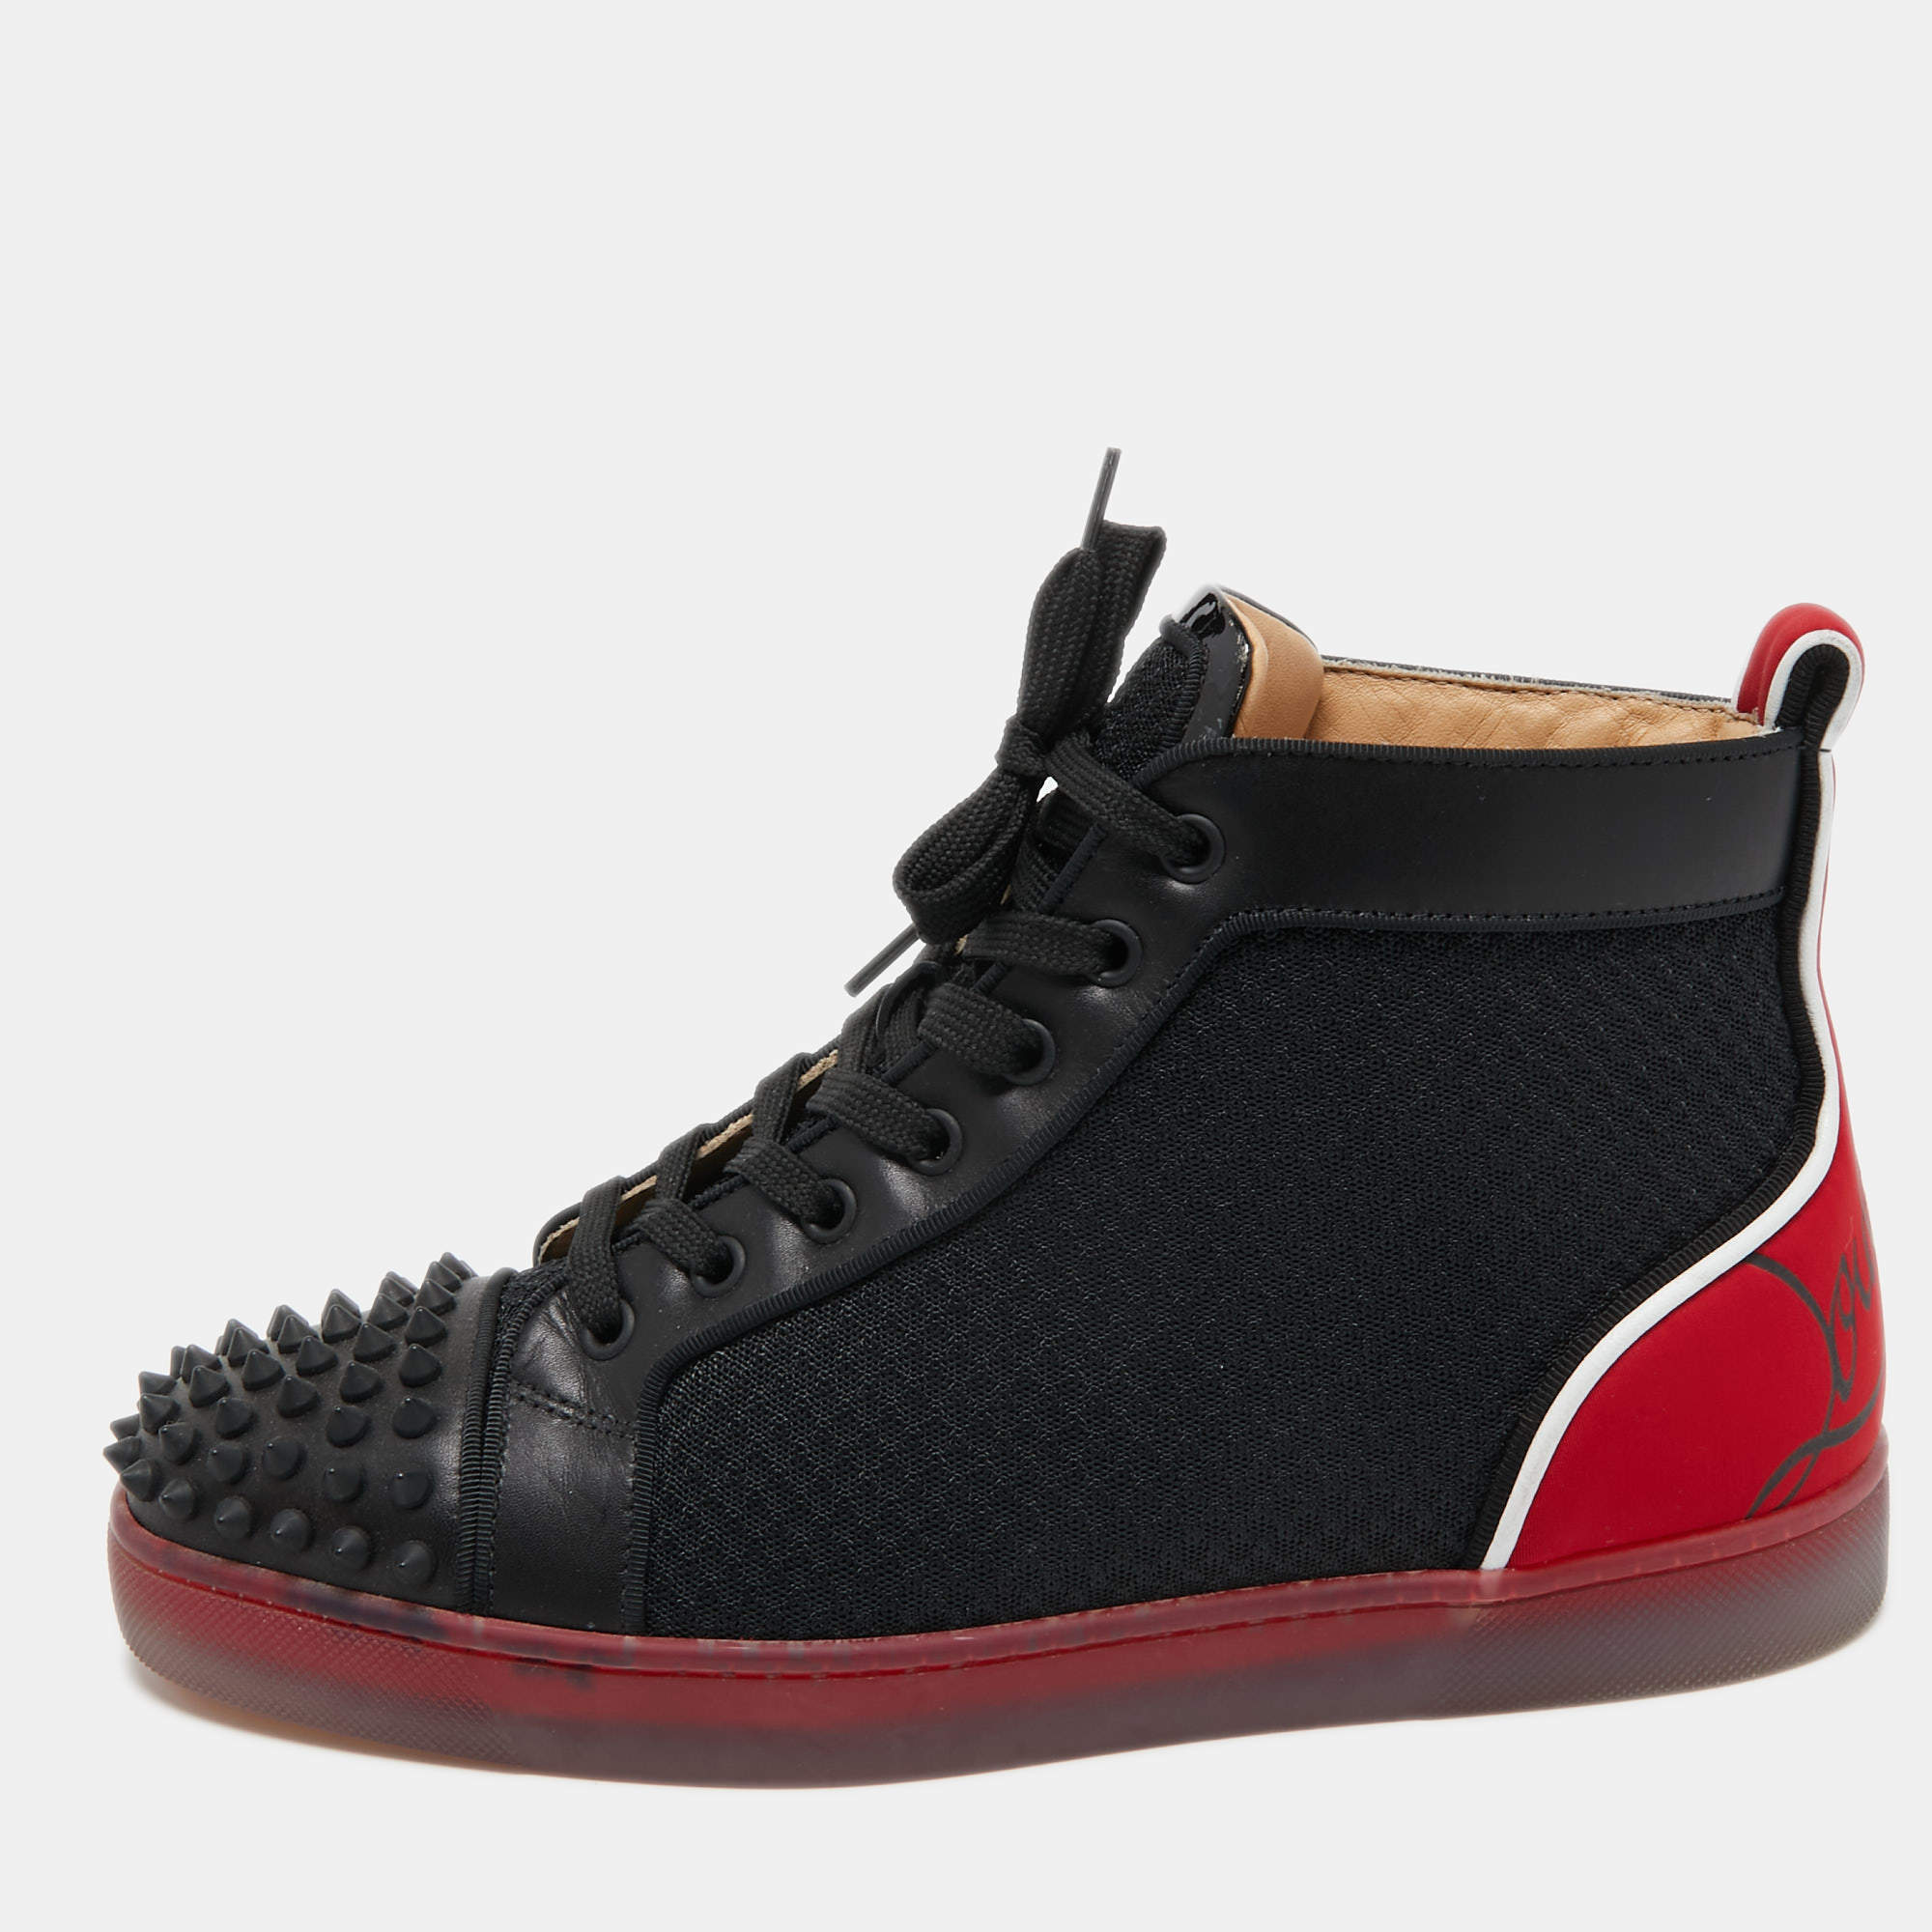 Christian Black/Red Leather, Mesh and Neoprene Louis Spikes Orlato Sneakers 40 Christian Louboutin | TLC